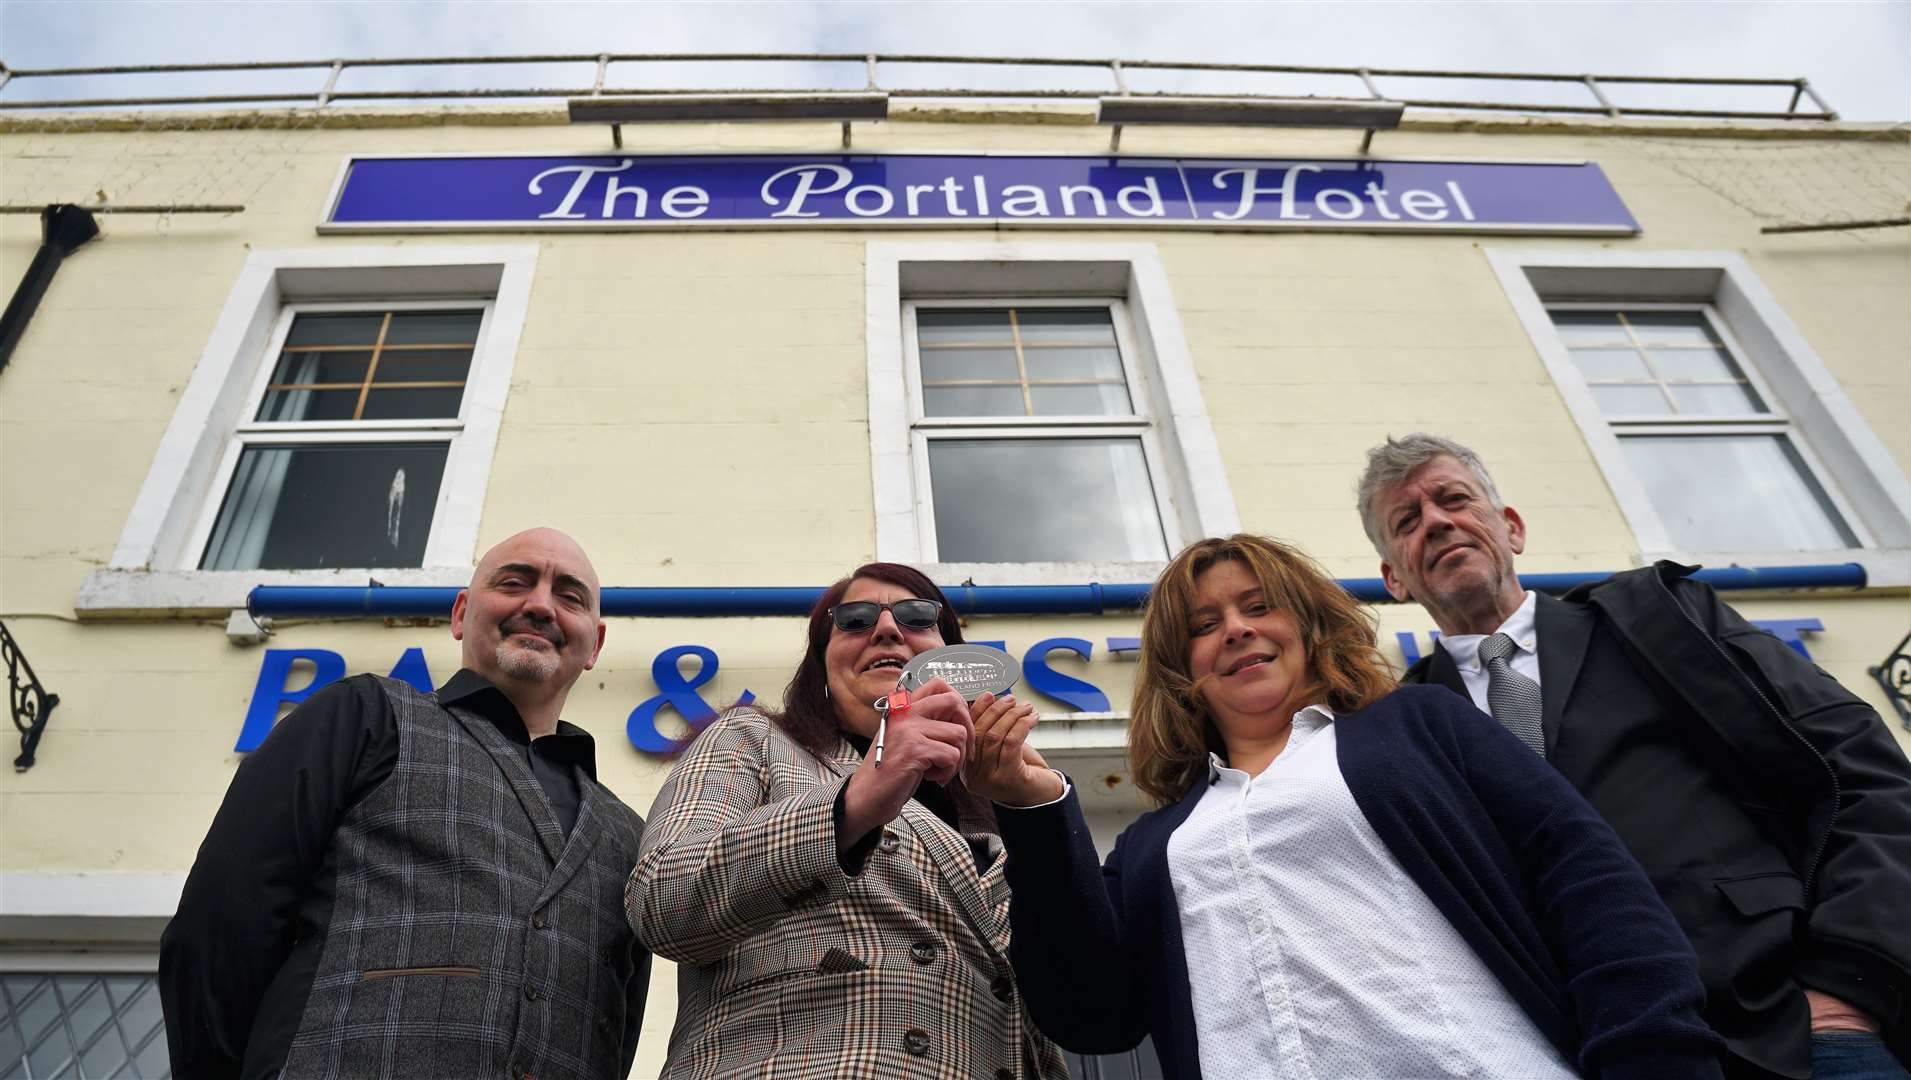 Previous owners of the Portland Hotel Steven Swan and his sister Sharn, at left, hand over the hotel keys to Jeff Harling and his wife Sam Mofttah. Picture: DGS